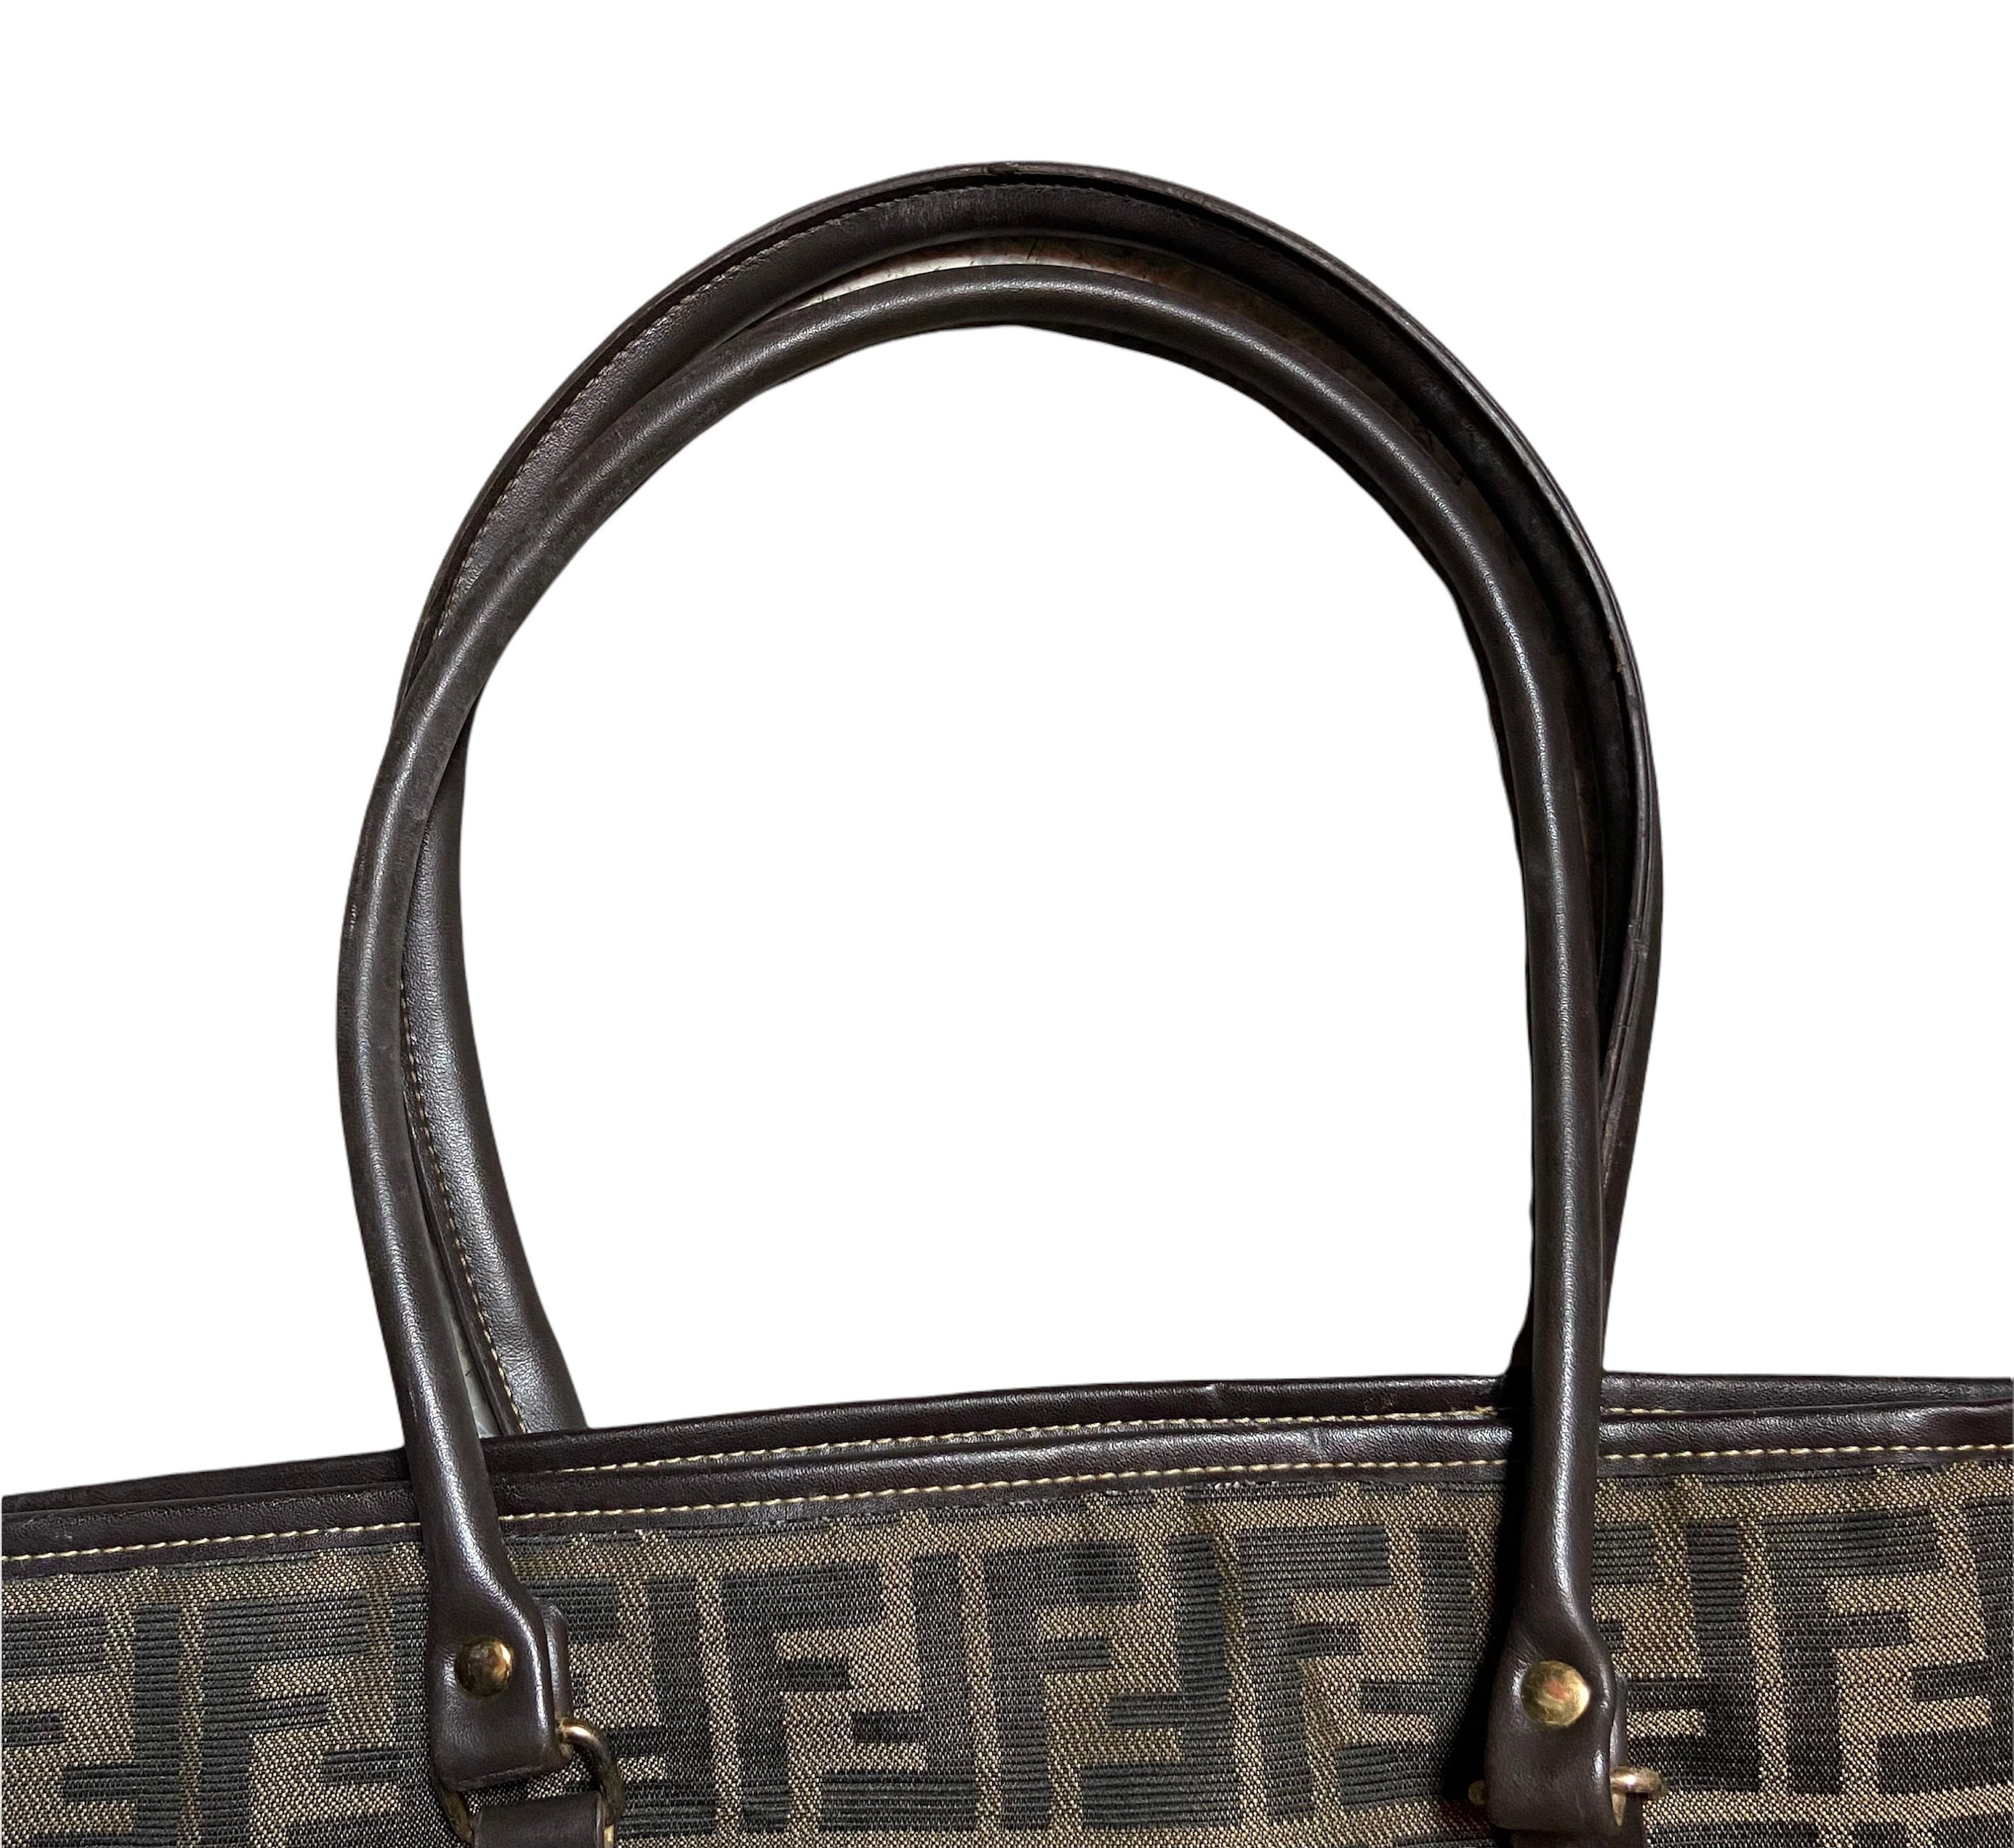 FENDI Zucca Vintage FF Logo Tote - A World Of Goods For You, LLC